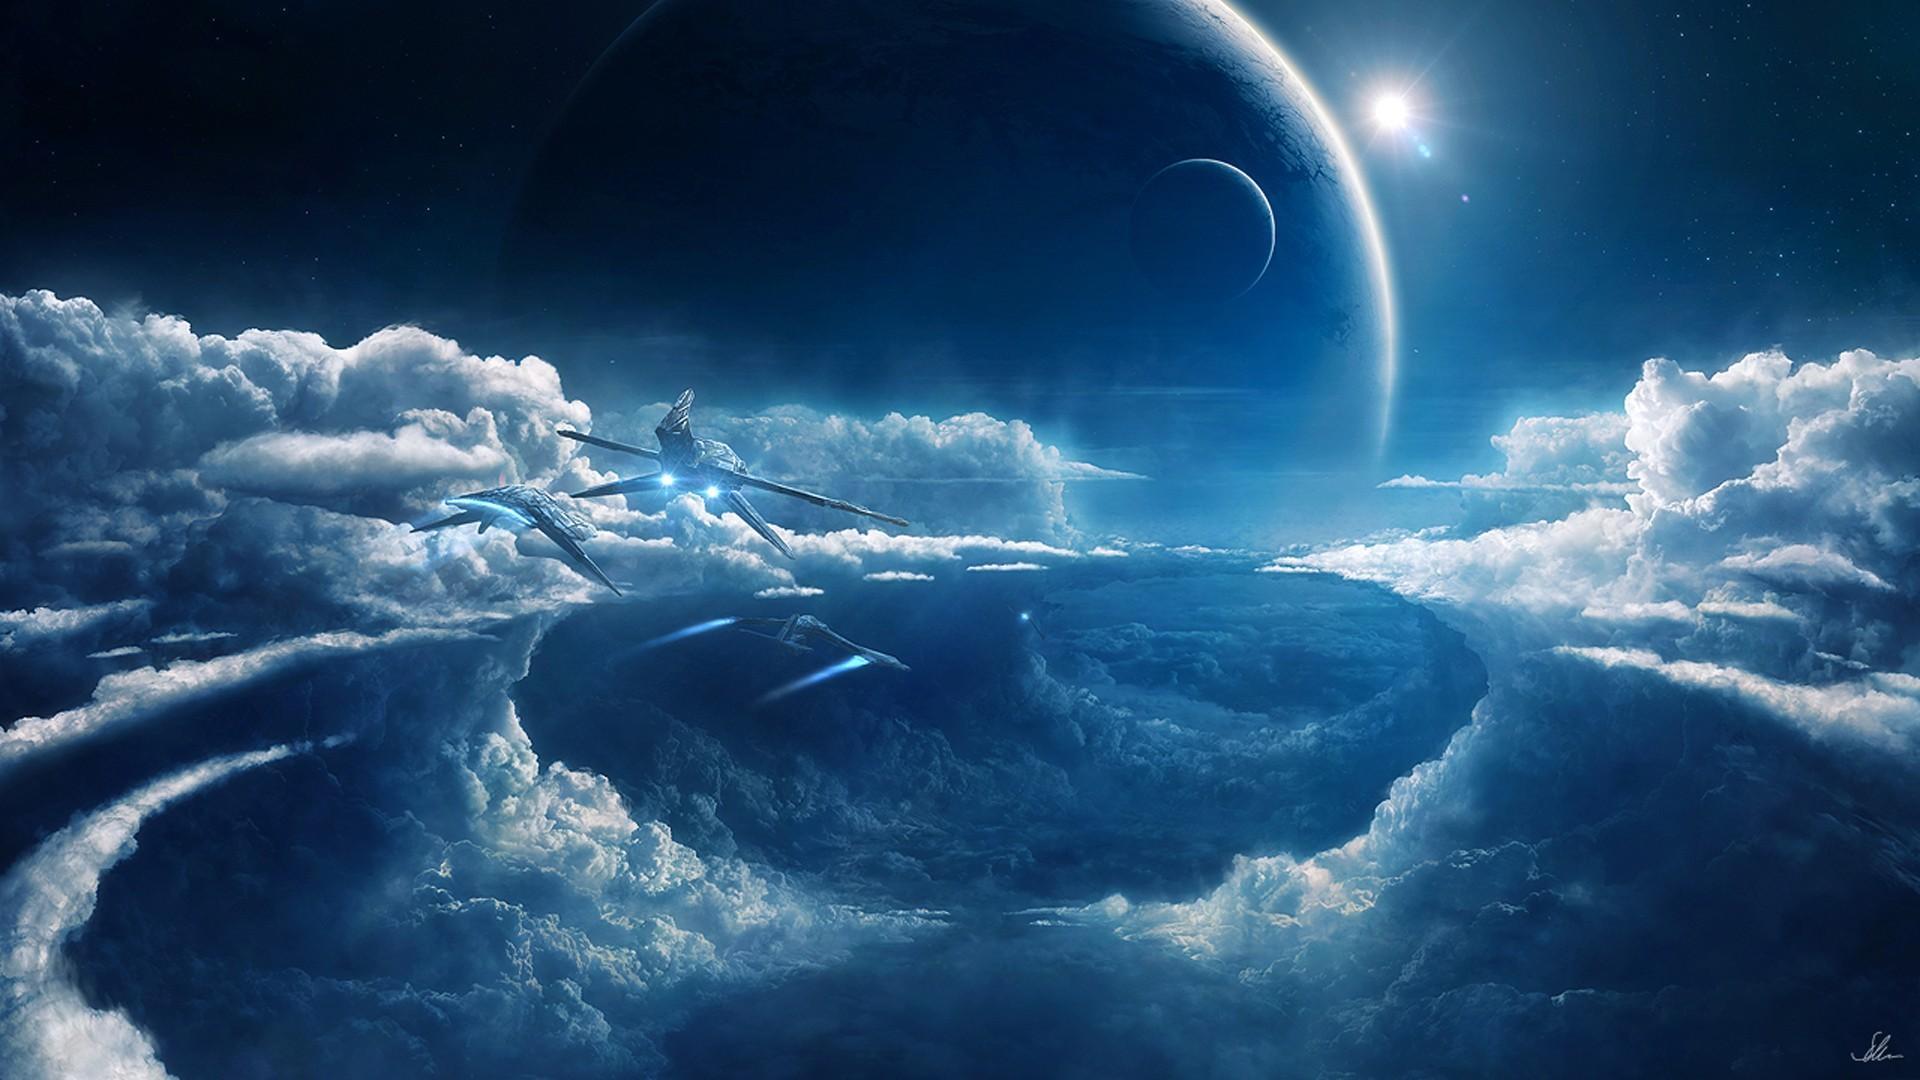 Outer space planets prometheus wallpaper